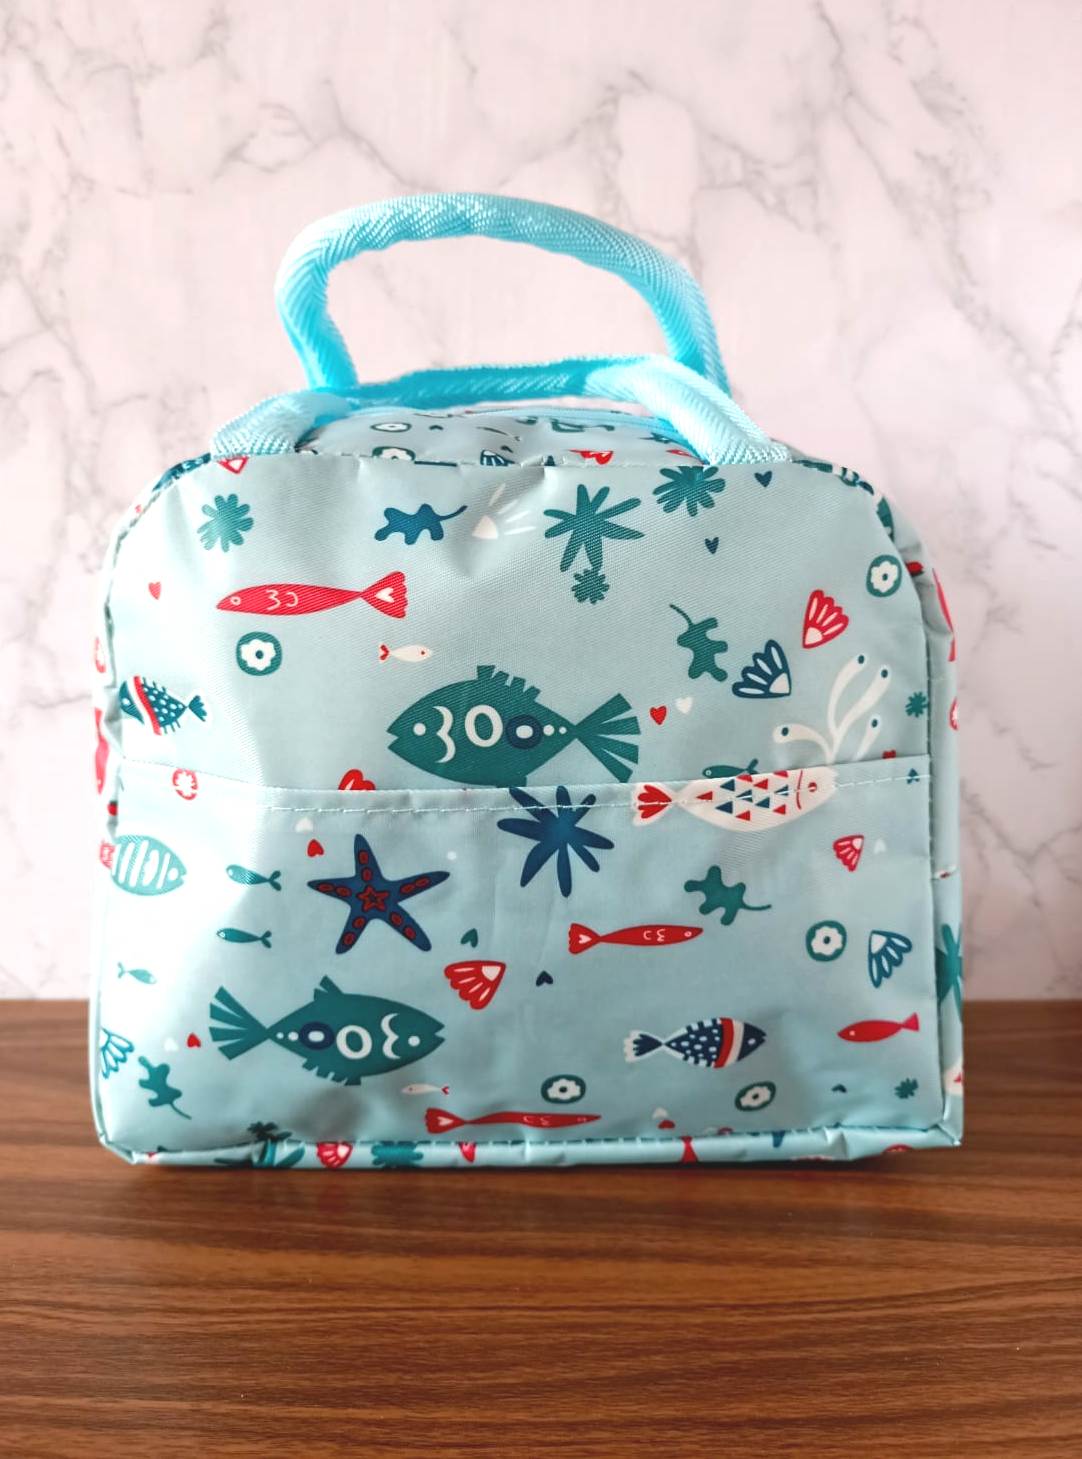 under the sea theme bags for return gifts birthday 